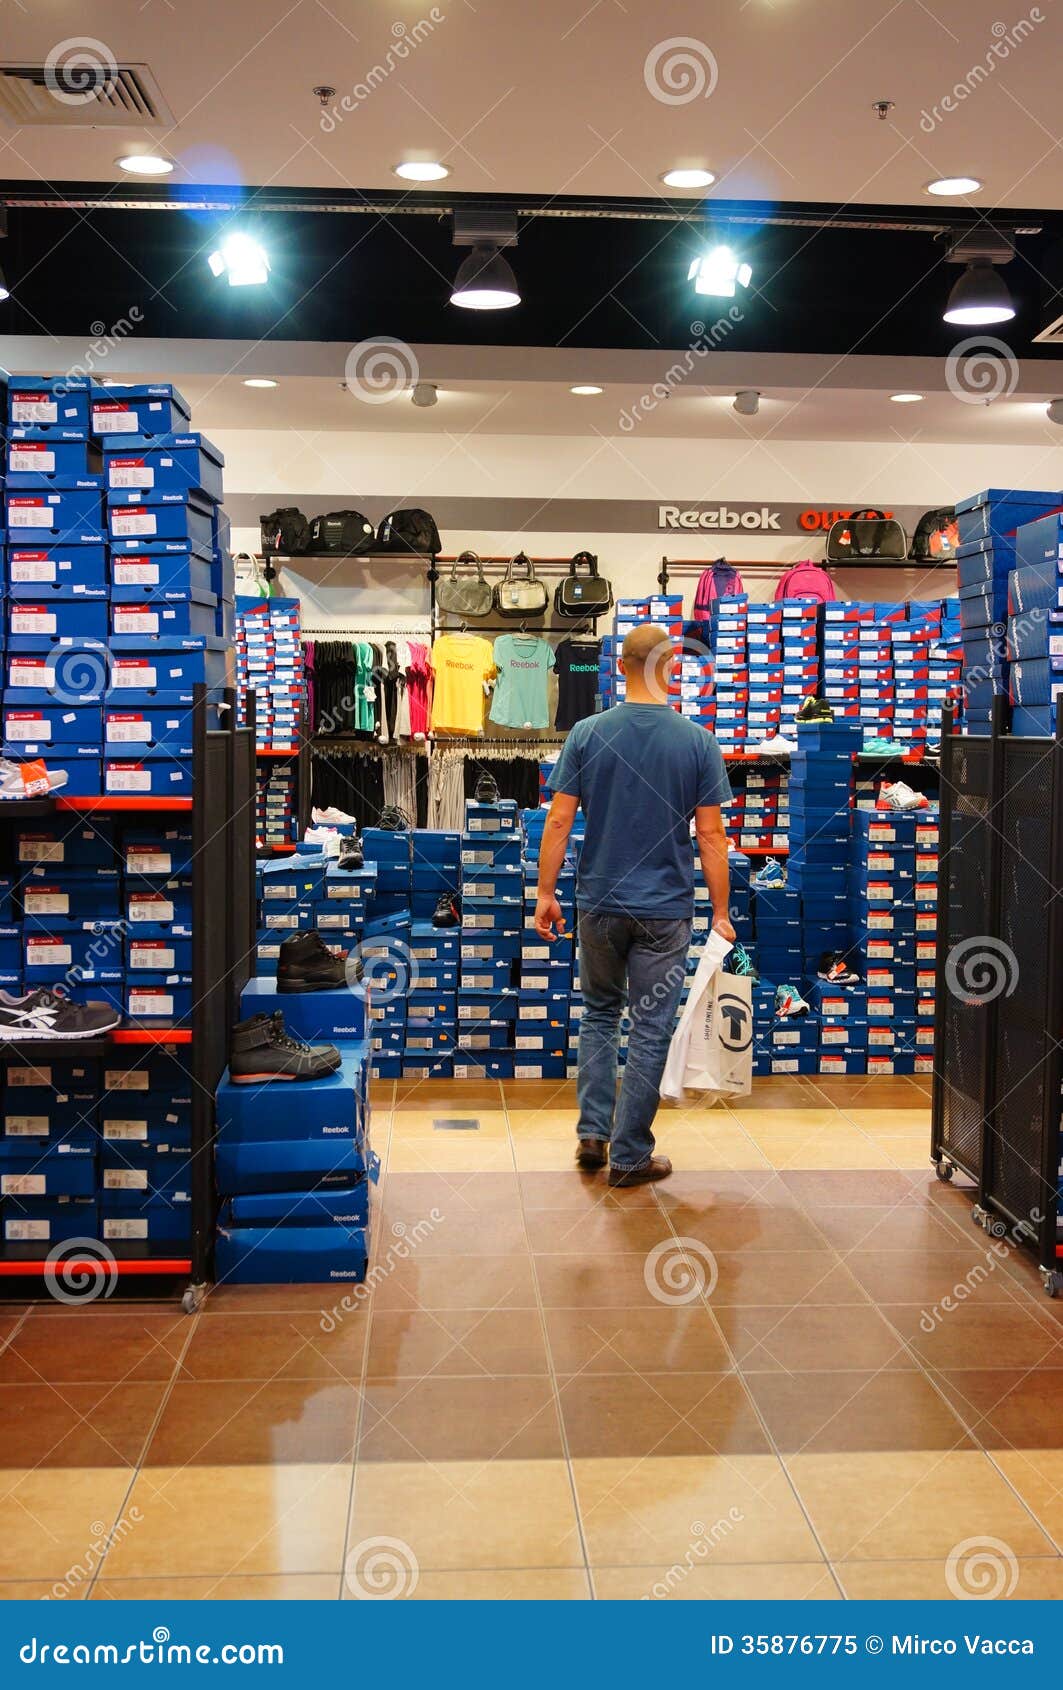 the reebok outlet